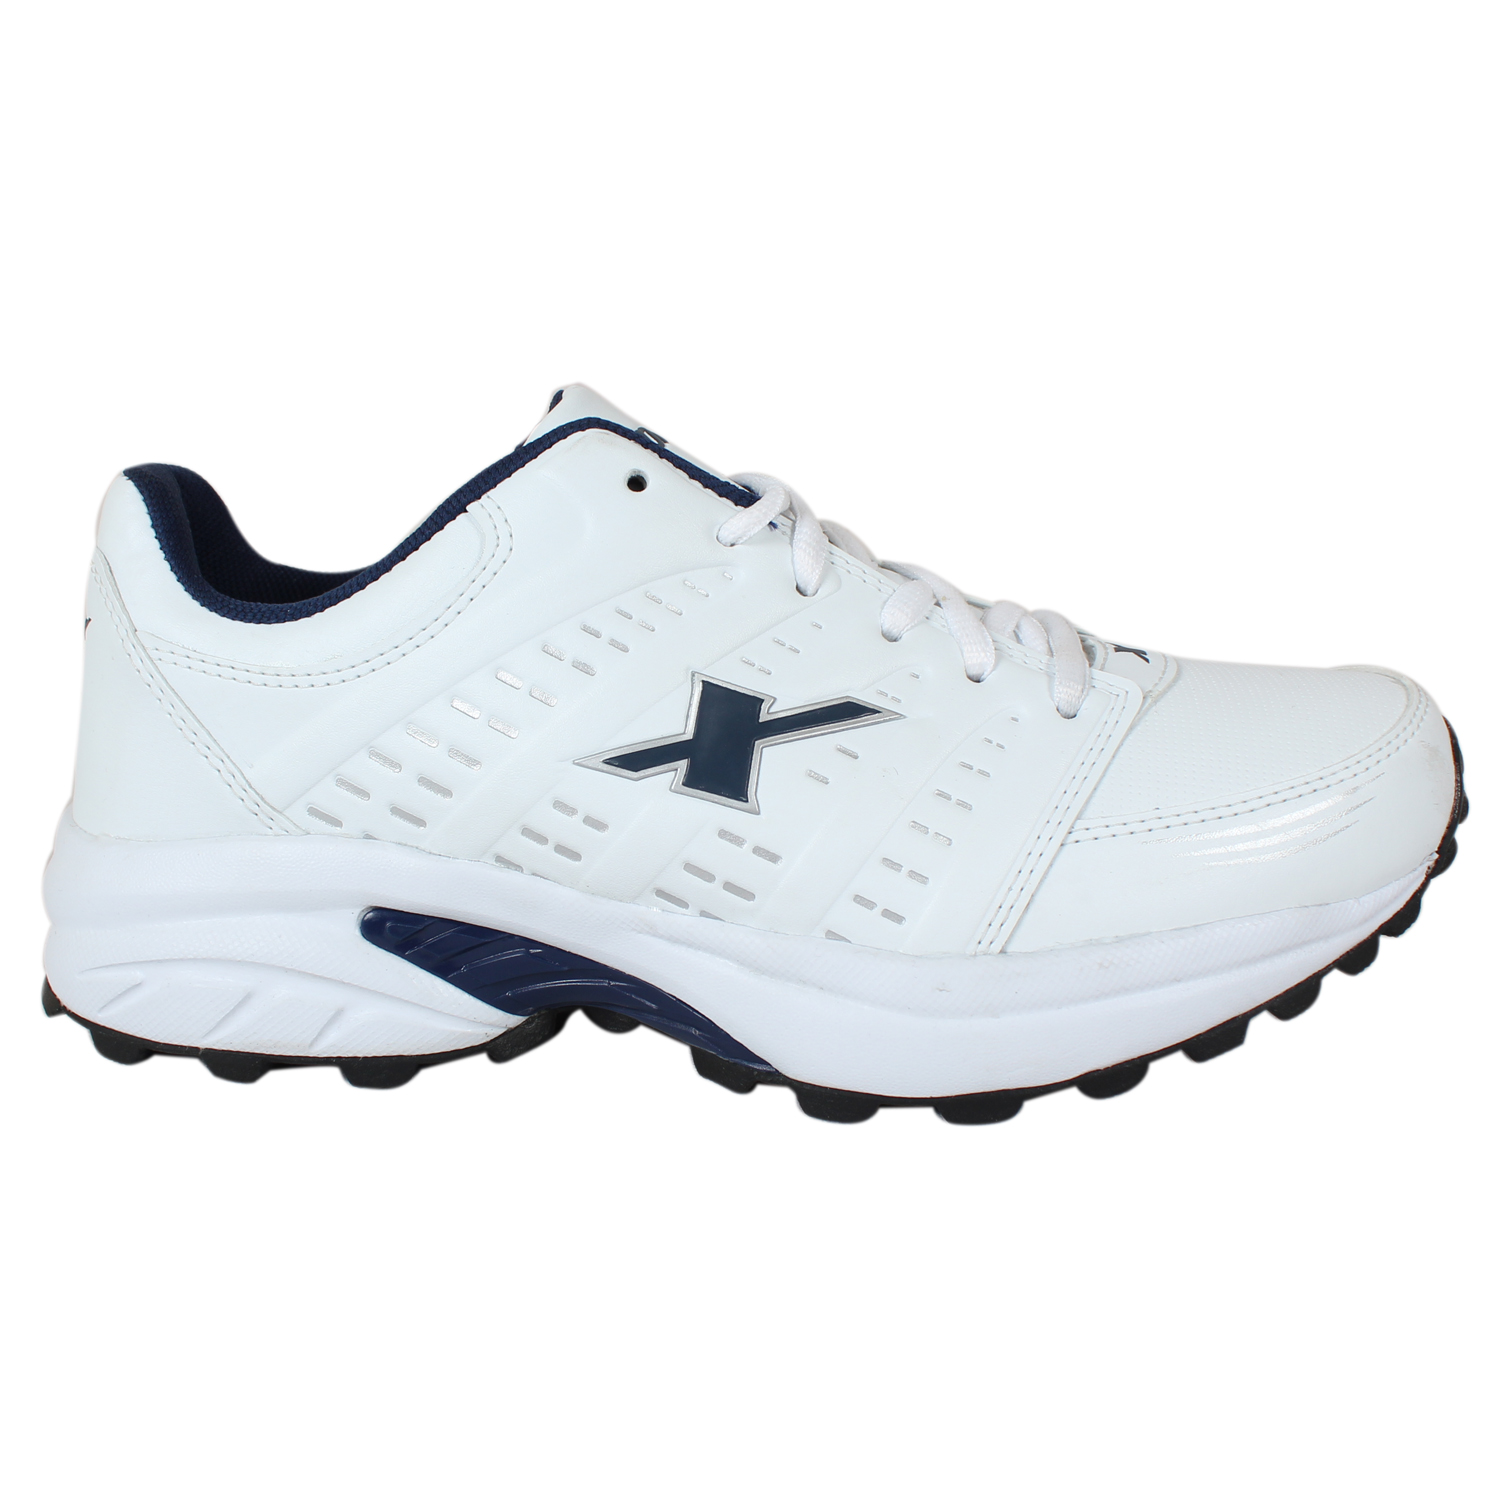 Buy Sparx Men's White Lace-up Running Shoes Online @ ₹1399 from ShopClues